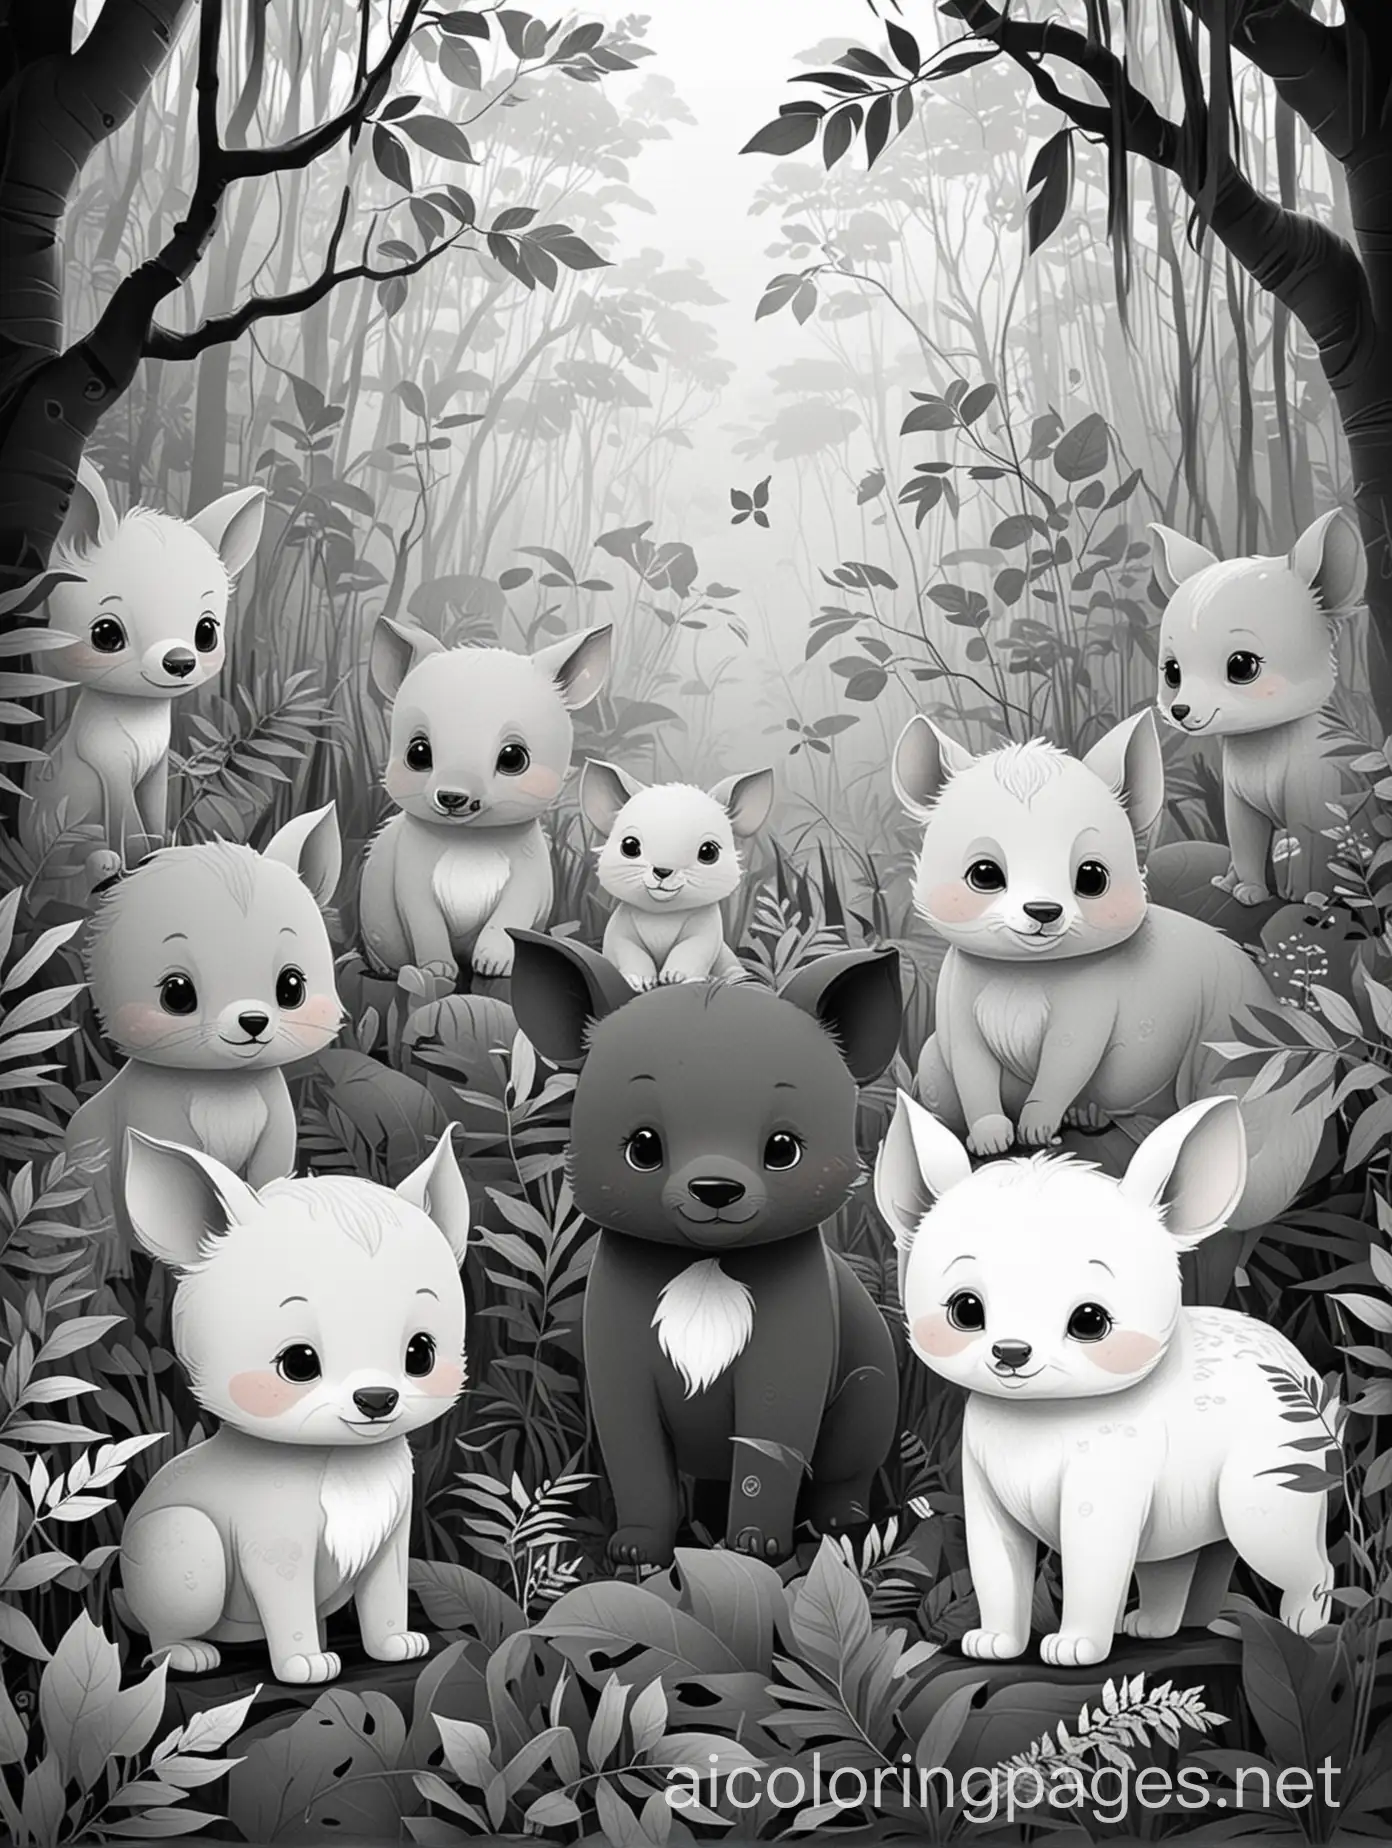 Cute little cartoon style mammals in a dark jungle, smoky and haze surroundings, Coloring Page, black and white, line art, white background, Simplicity, Ample White Space.